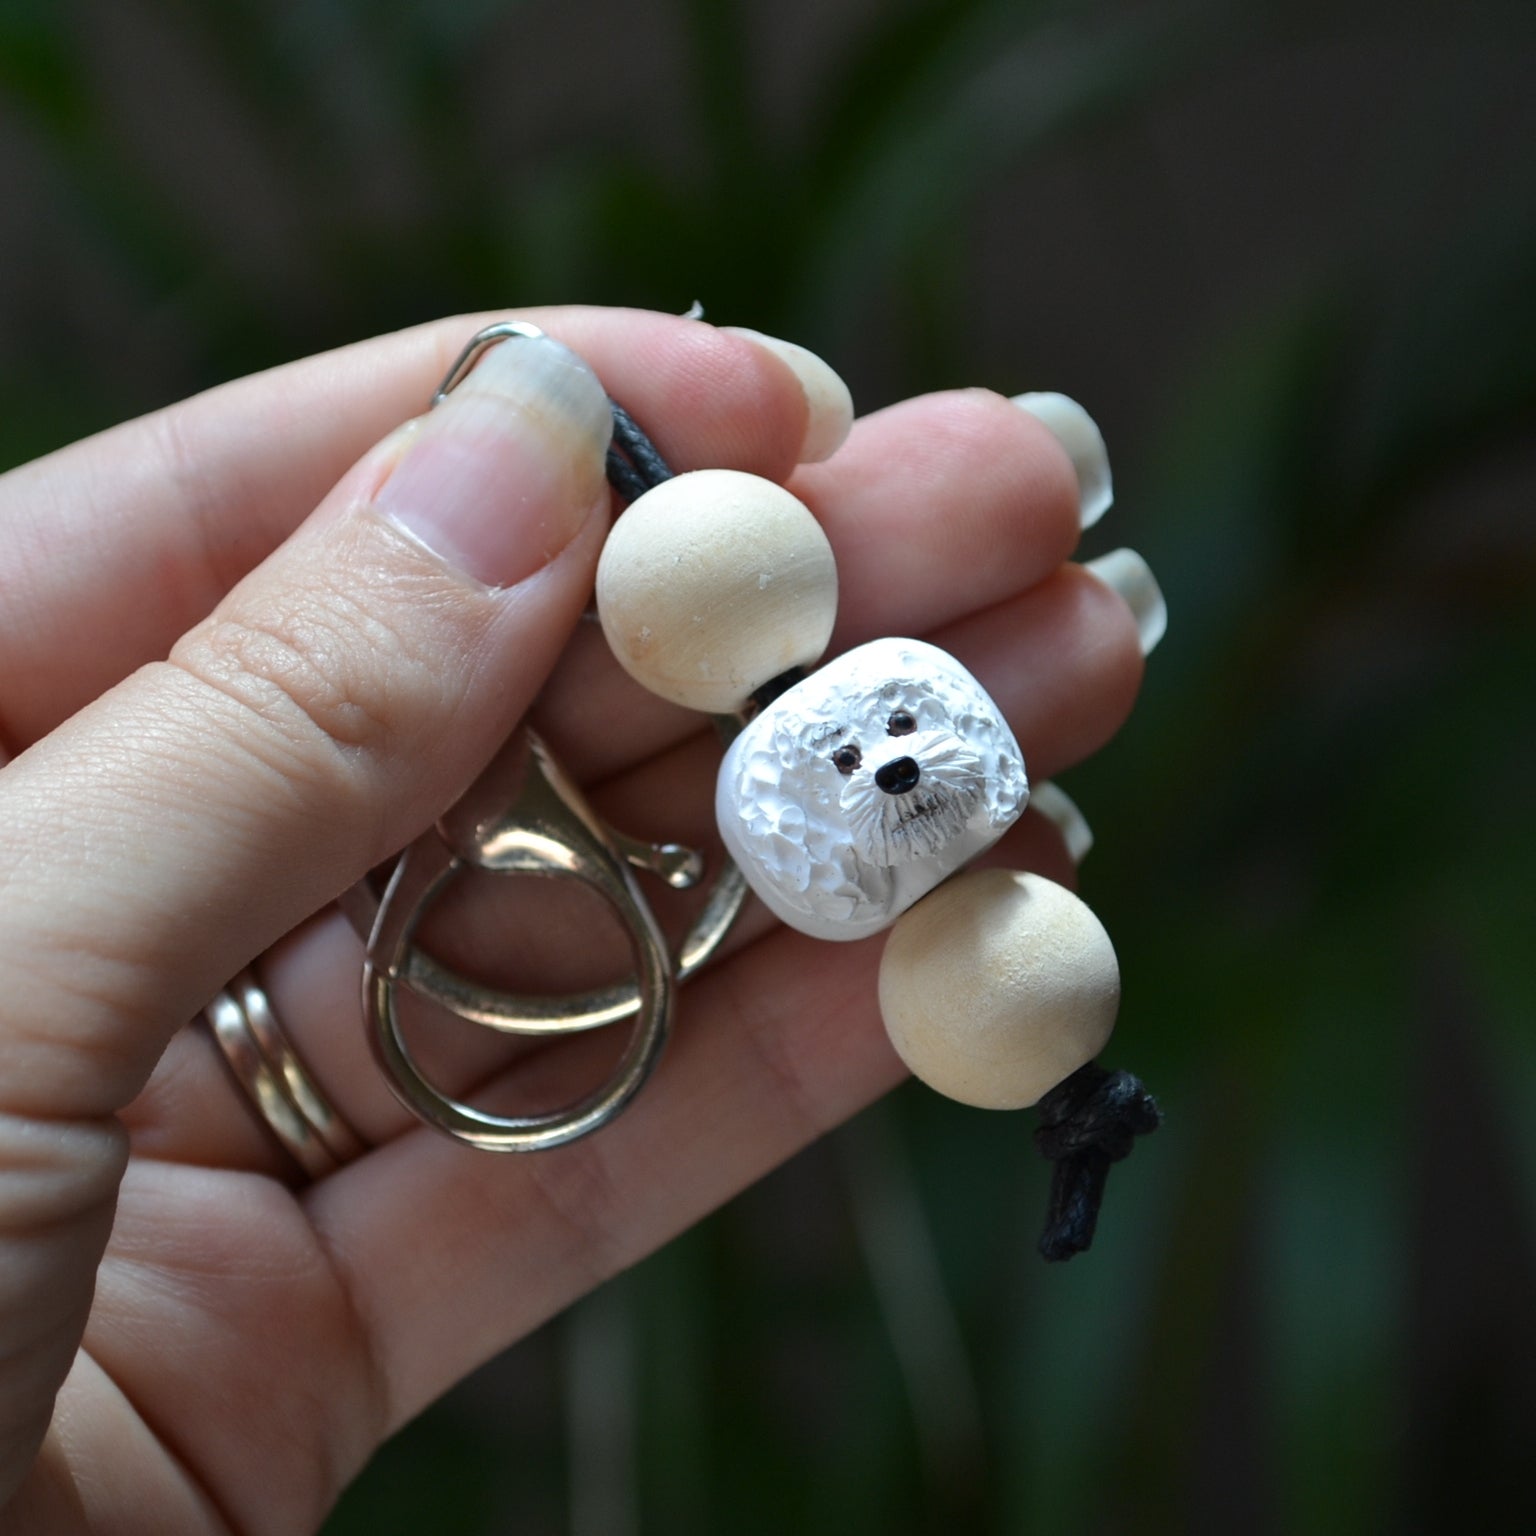 Handmade timber and polymer clay white poodle dog keychain being held in front of green palm plant background